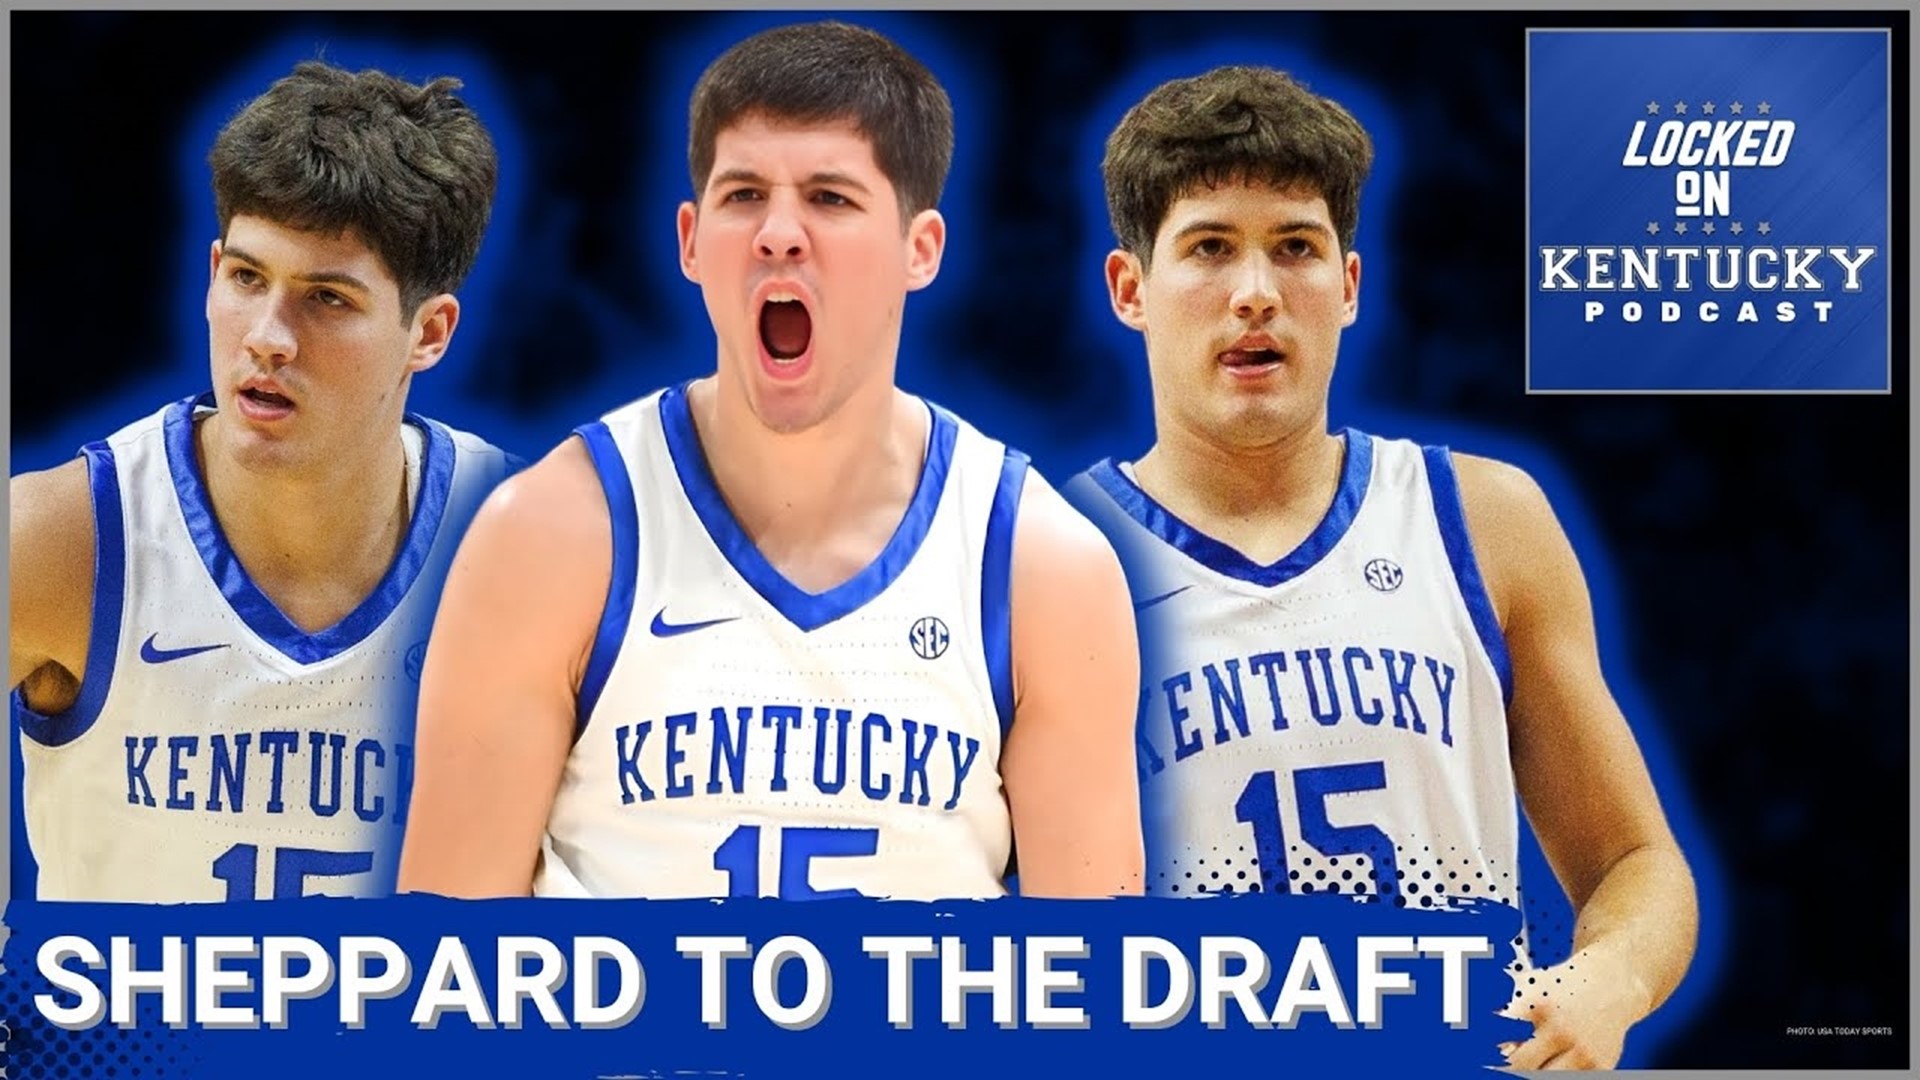 Kentucky basketball legend Reed Sheppard is declaring for the NBA Draft.